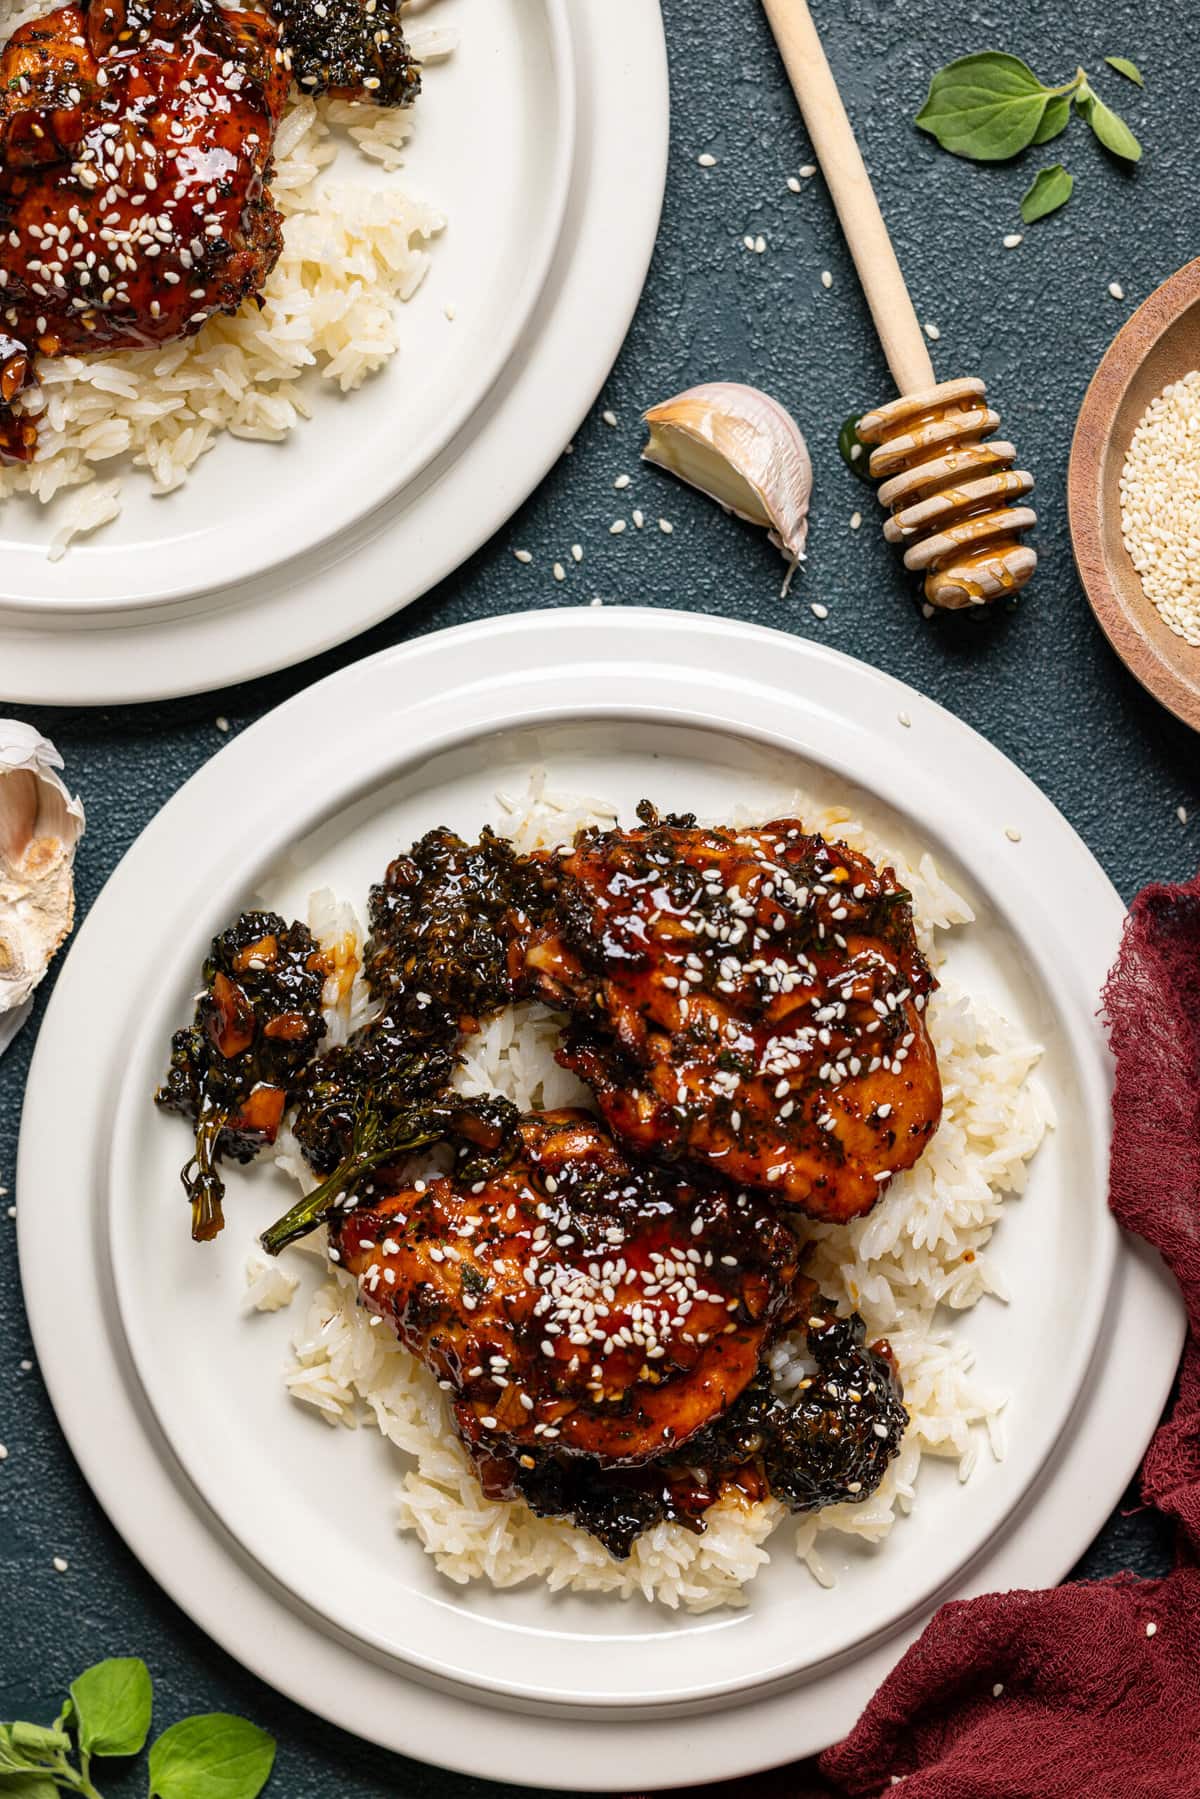 Chicken thighs and rice in two whit plates on a dark green table.